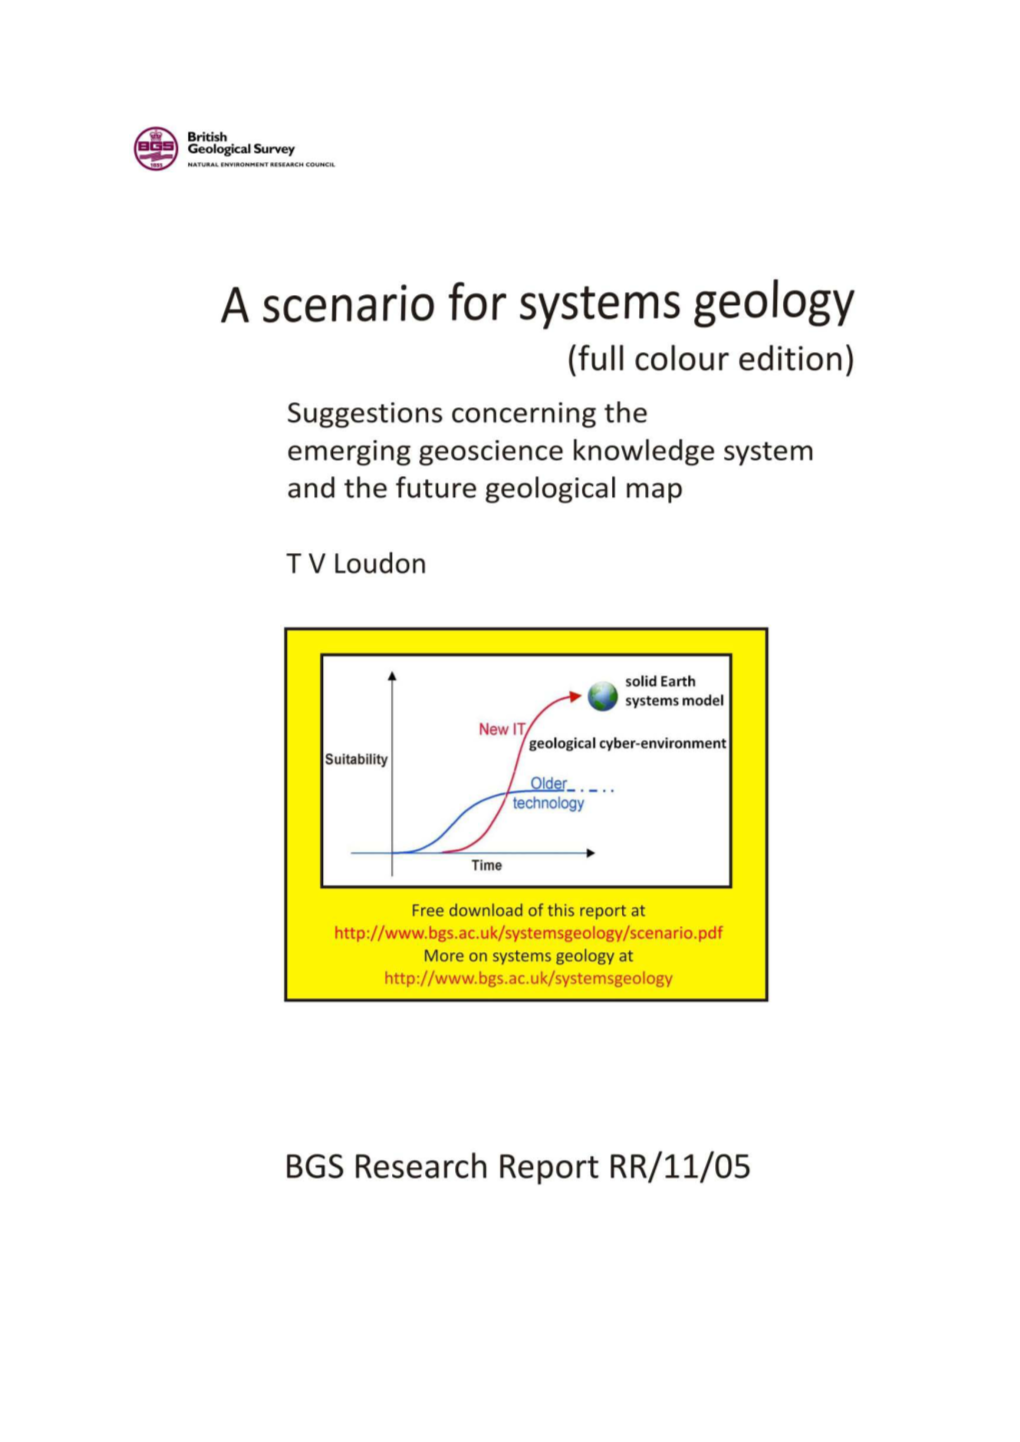 A Scenario for Systems Geology